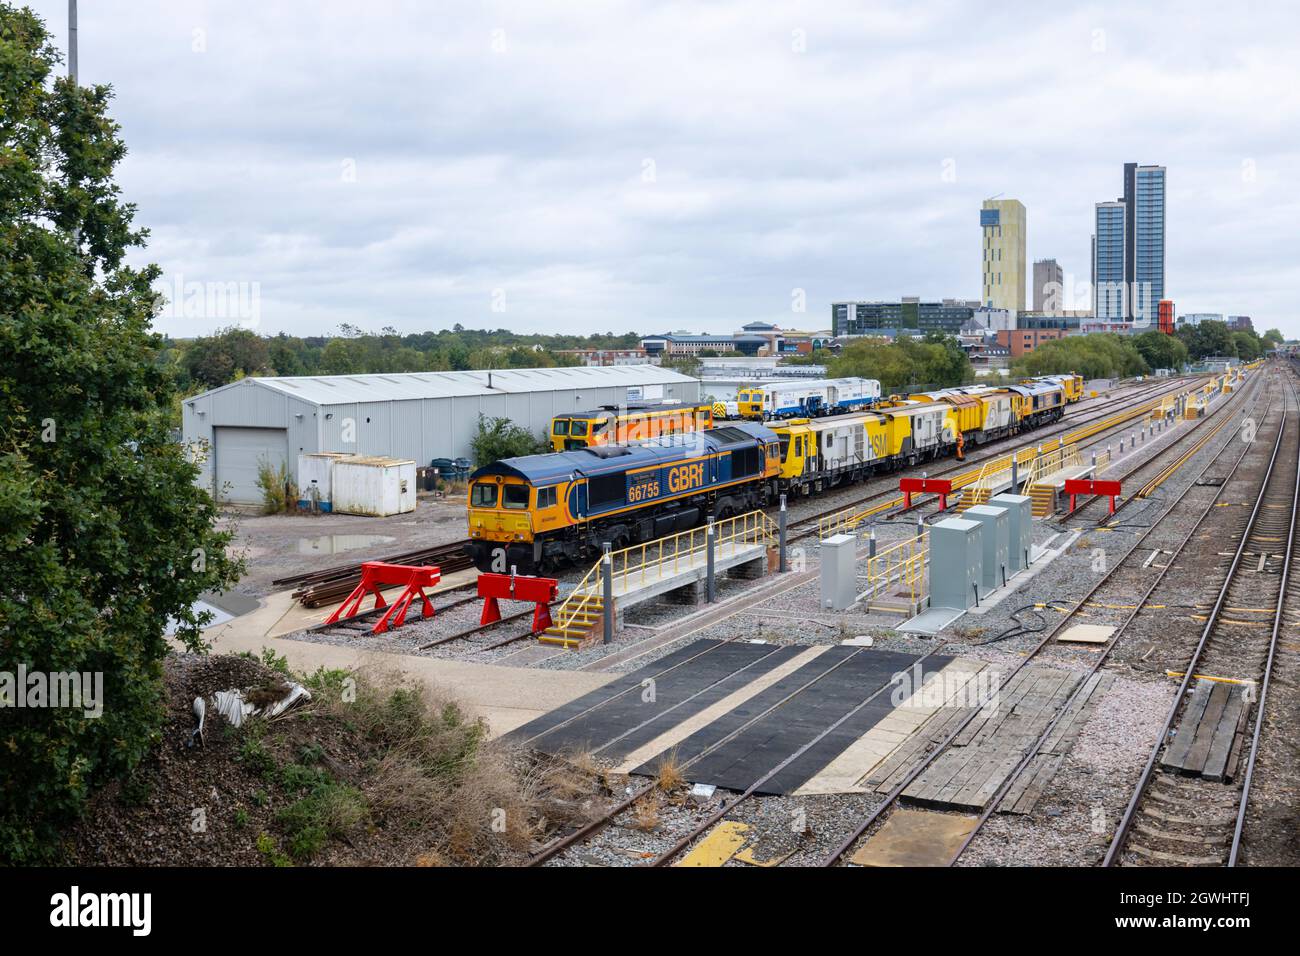 Rail freight depot with GBRf and HSM diesel engines in sidings at Woking railway station, Surrey, south-east England Stock Photo